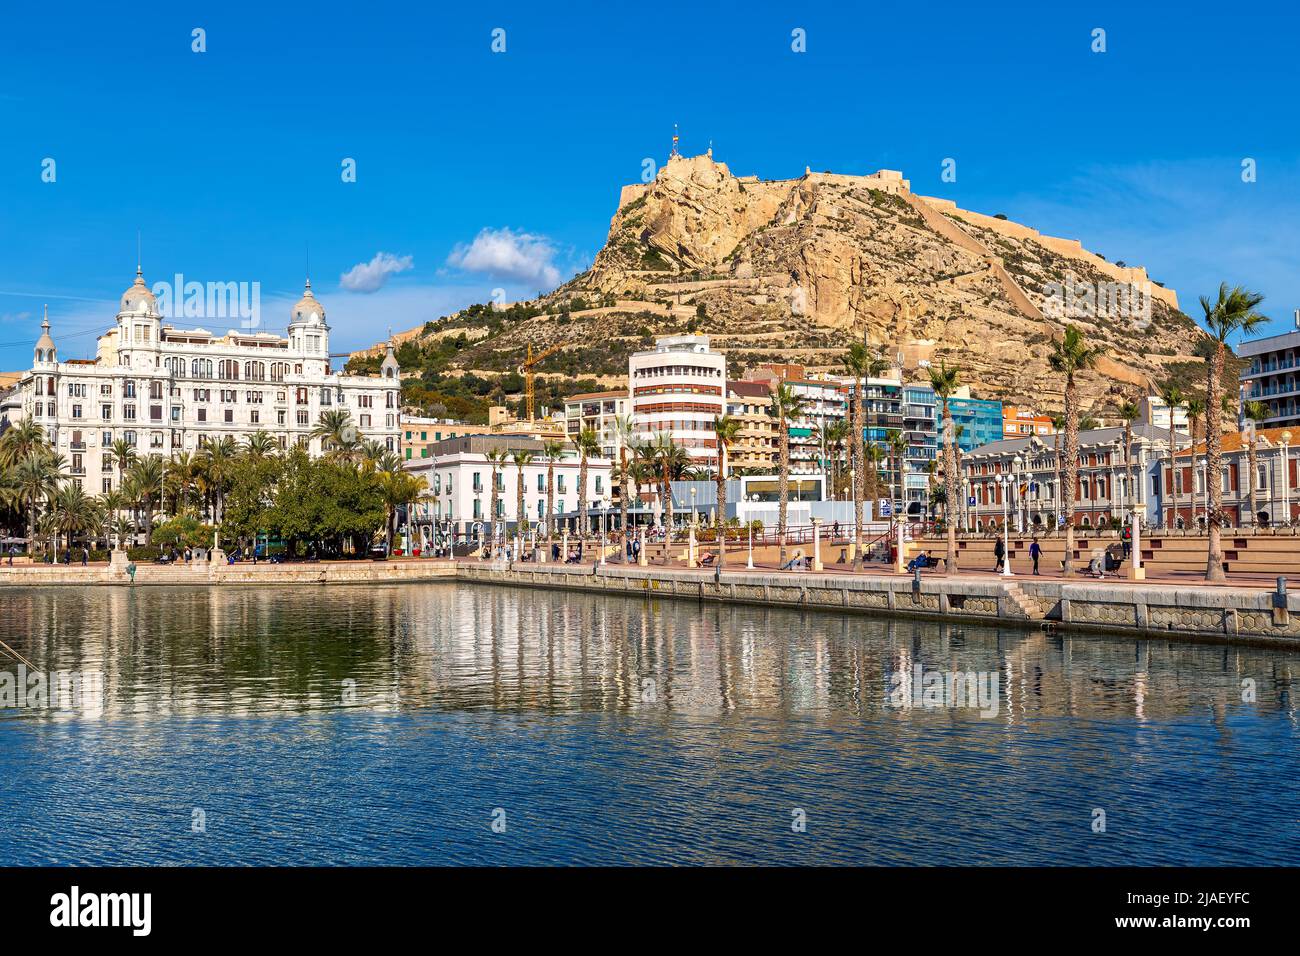 Promenade with palms and buildings on background and Mount Benacantil as seen from marina in Alicante, Spain. Stock Photo